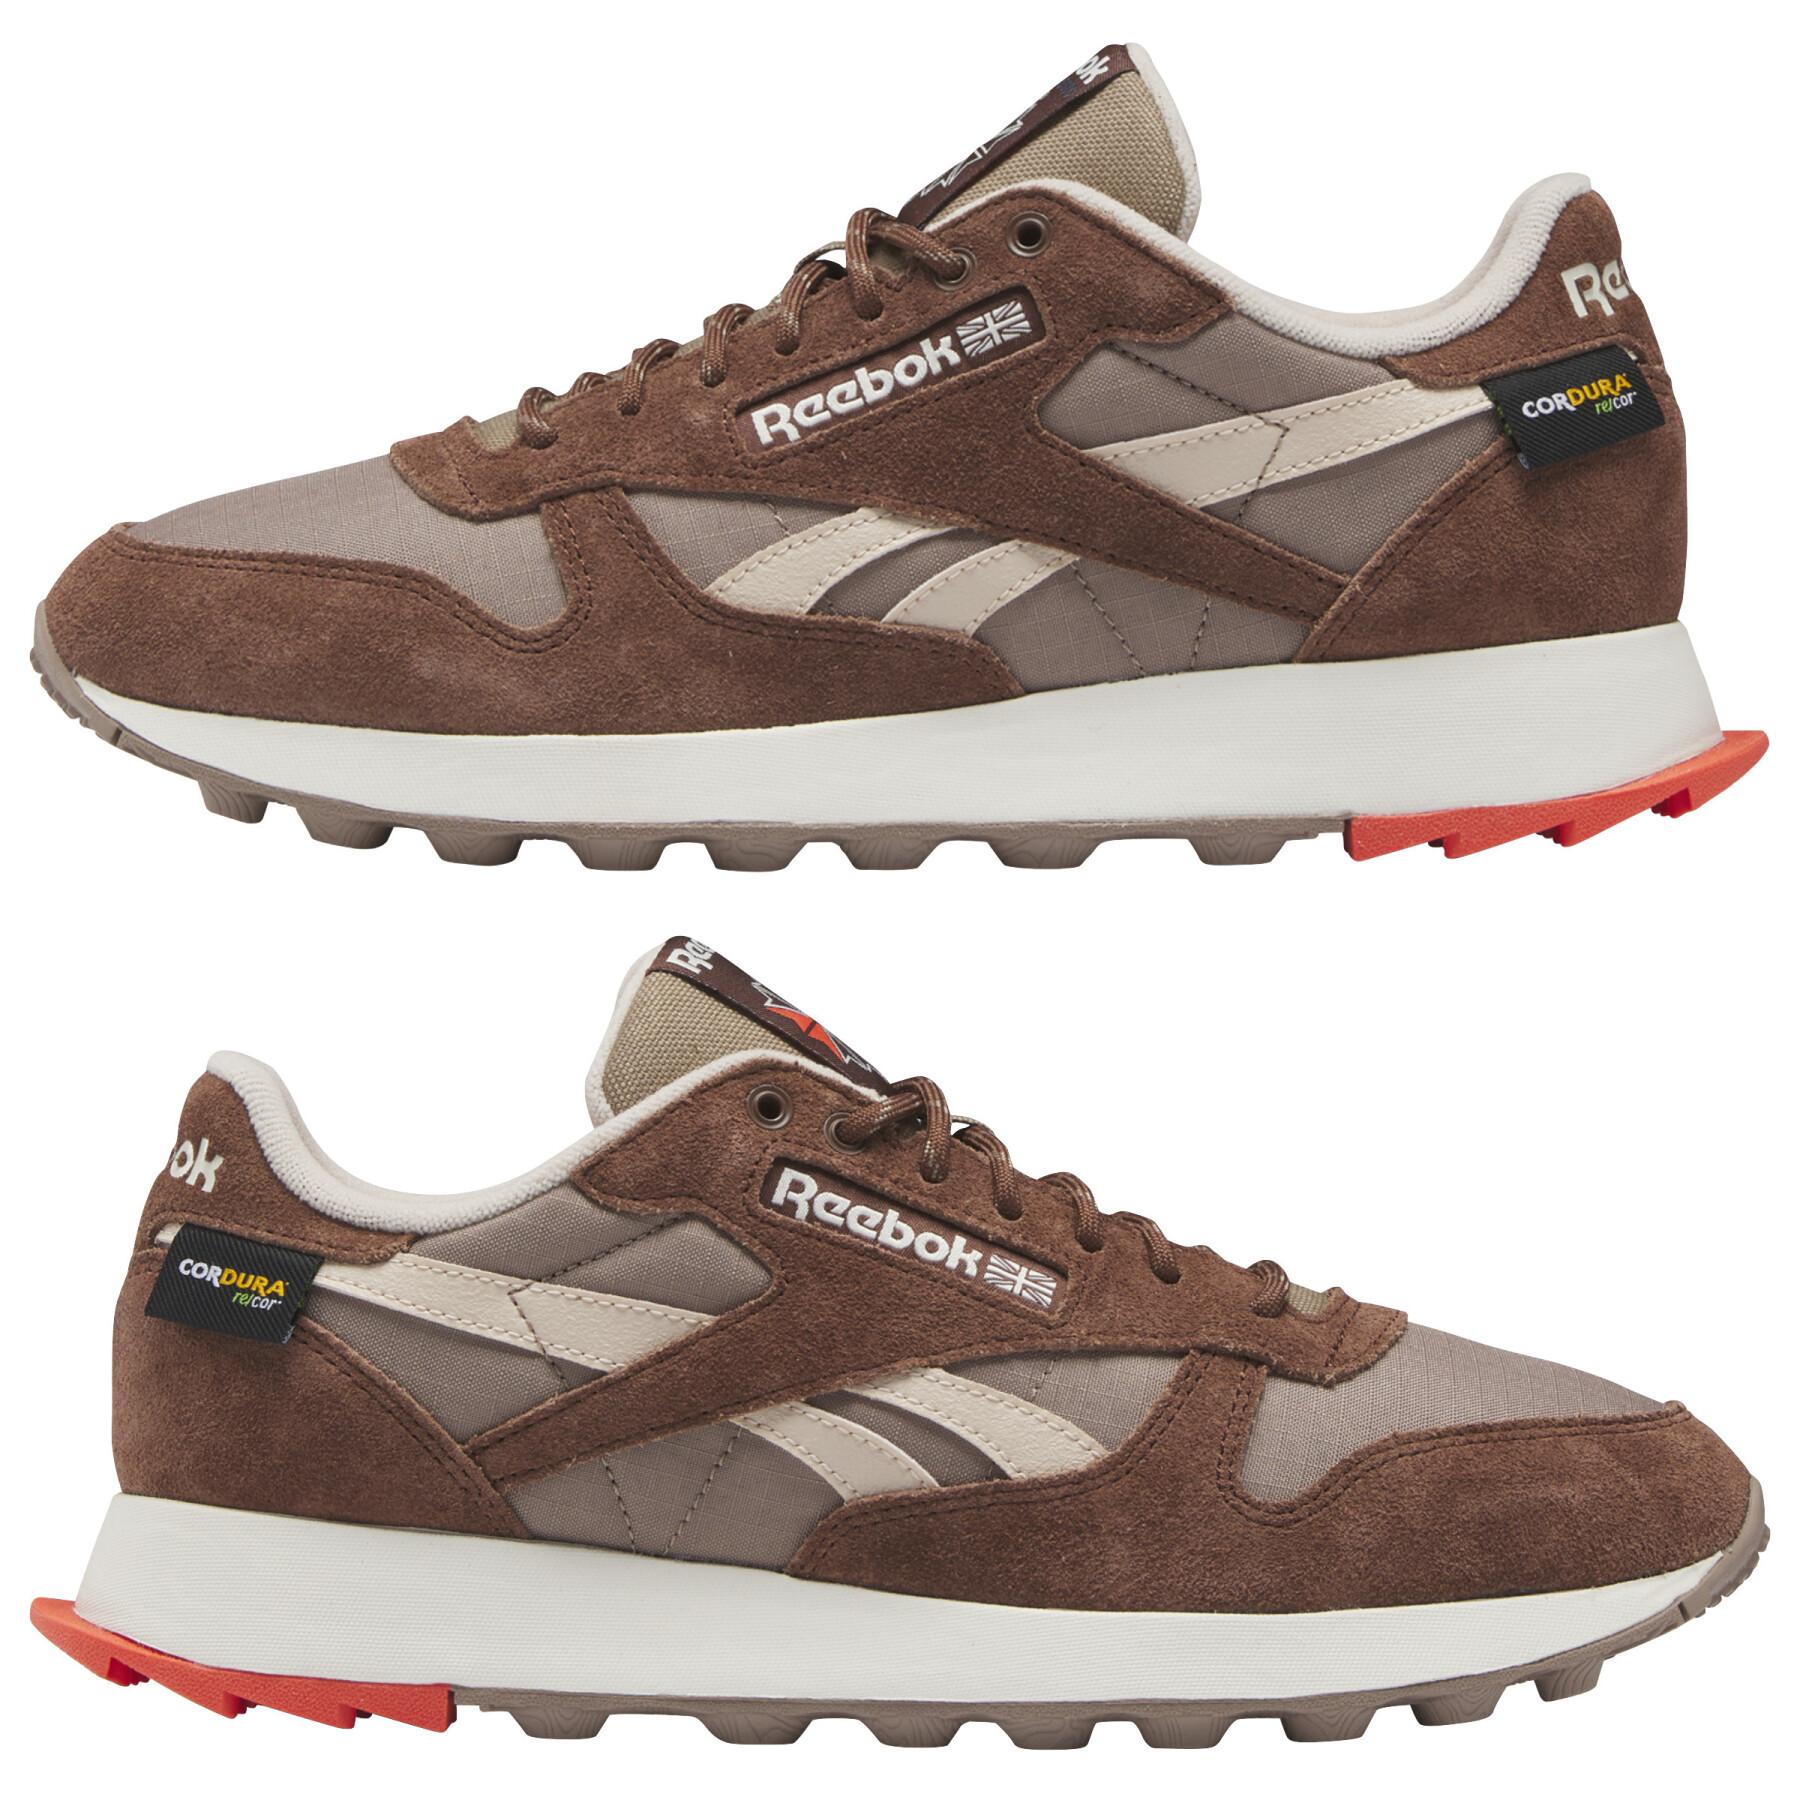 Child leather sneakers Reebok Classic